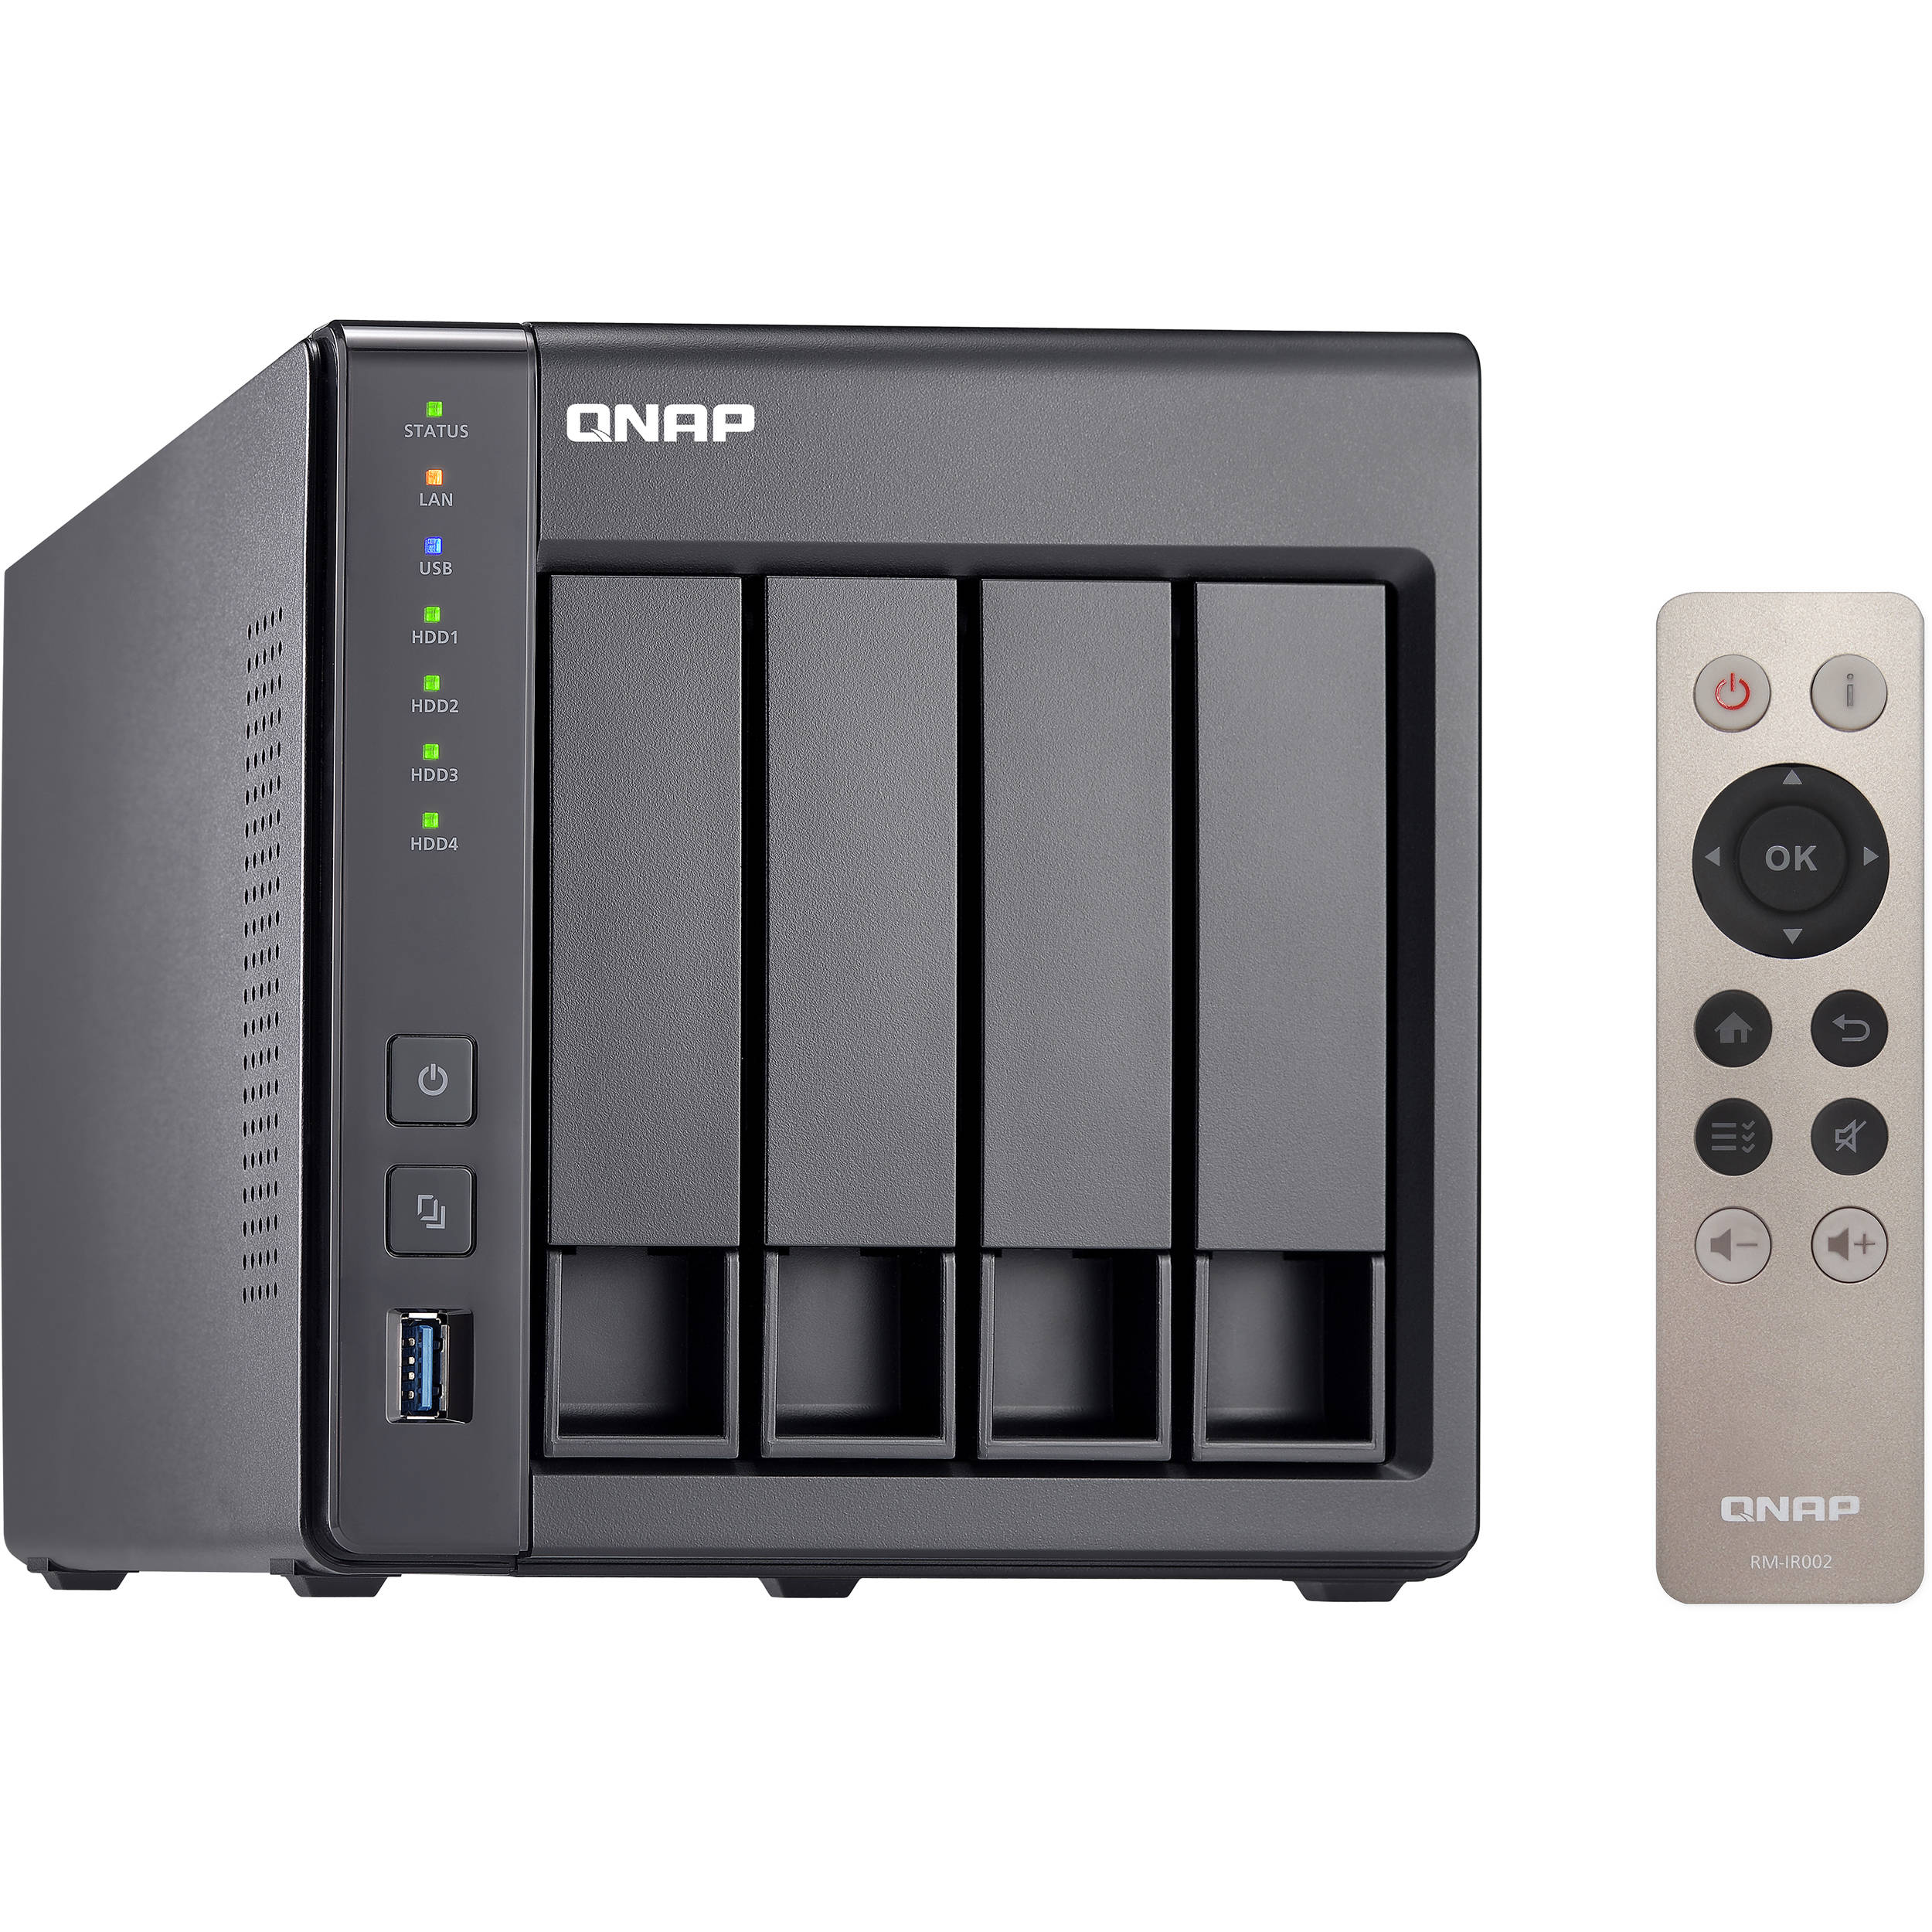 Image result for QNAP TS-451+